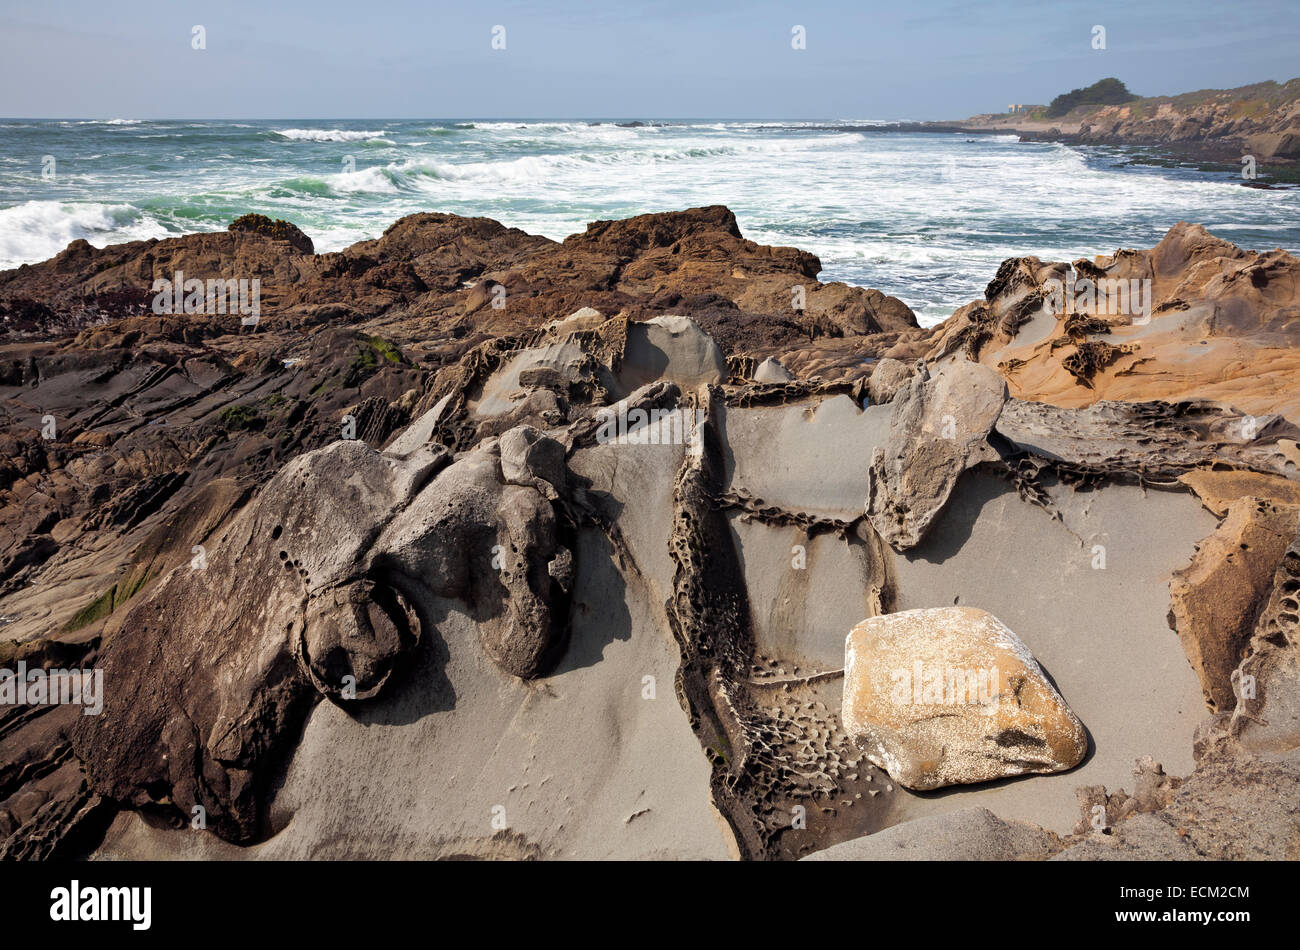 CA02505-00...CALIFORNIA - Shapes and colors in the eroded sandstone at Pescadero State Beach. Stock Photo